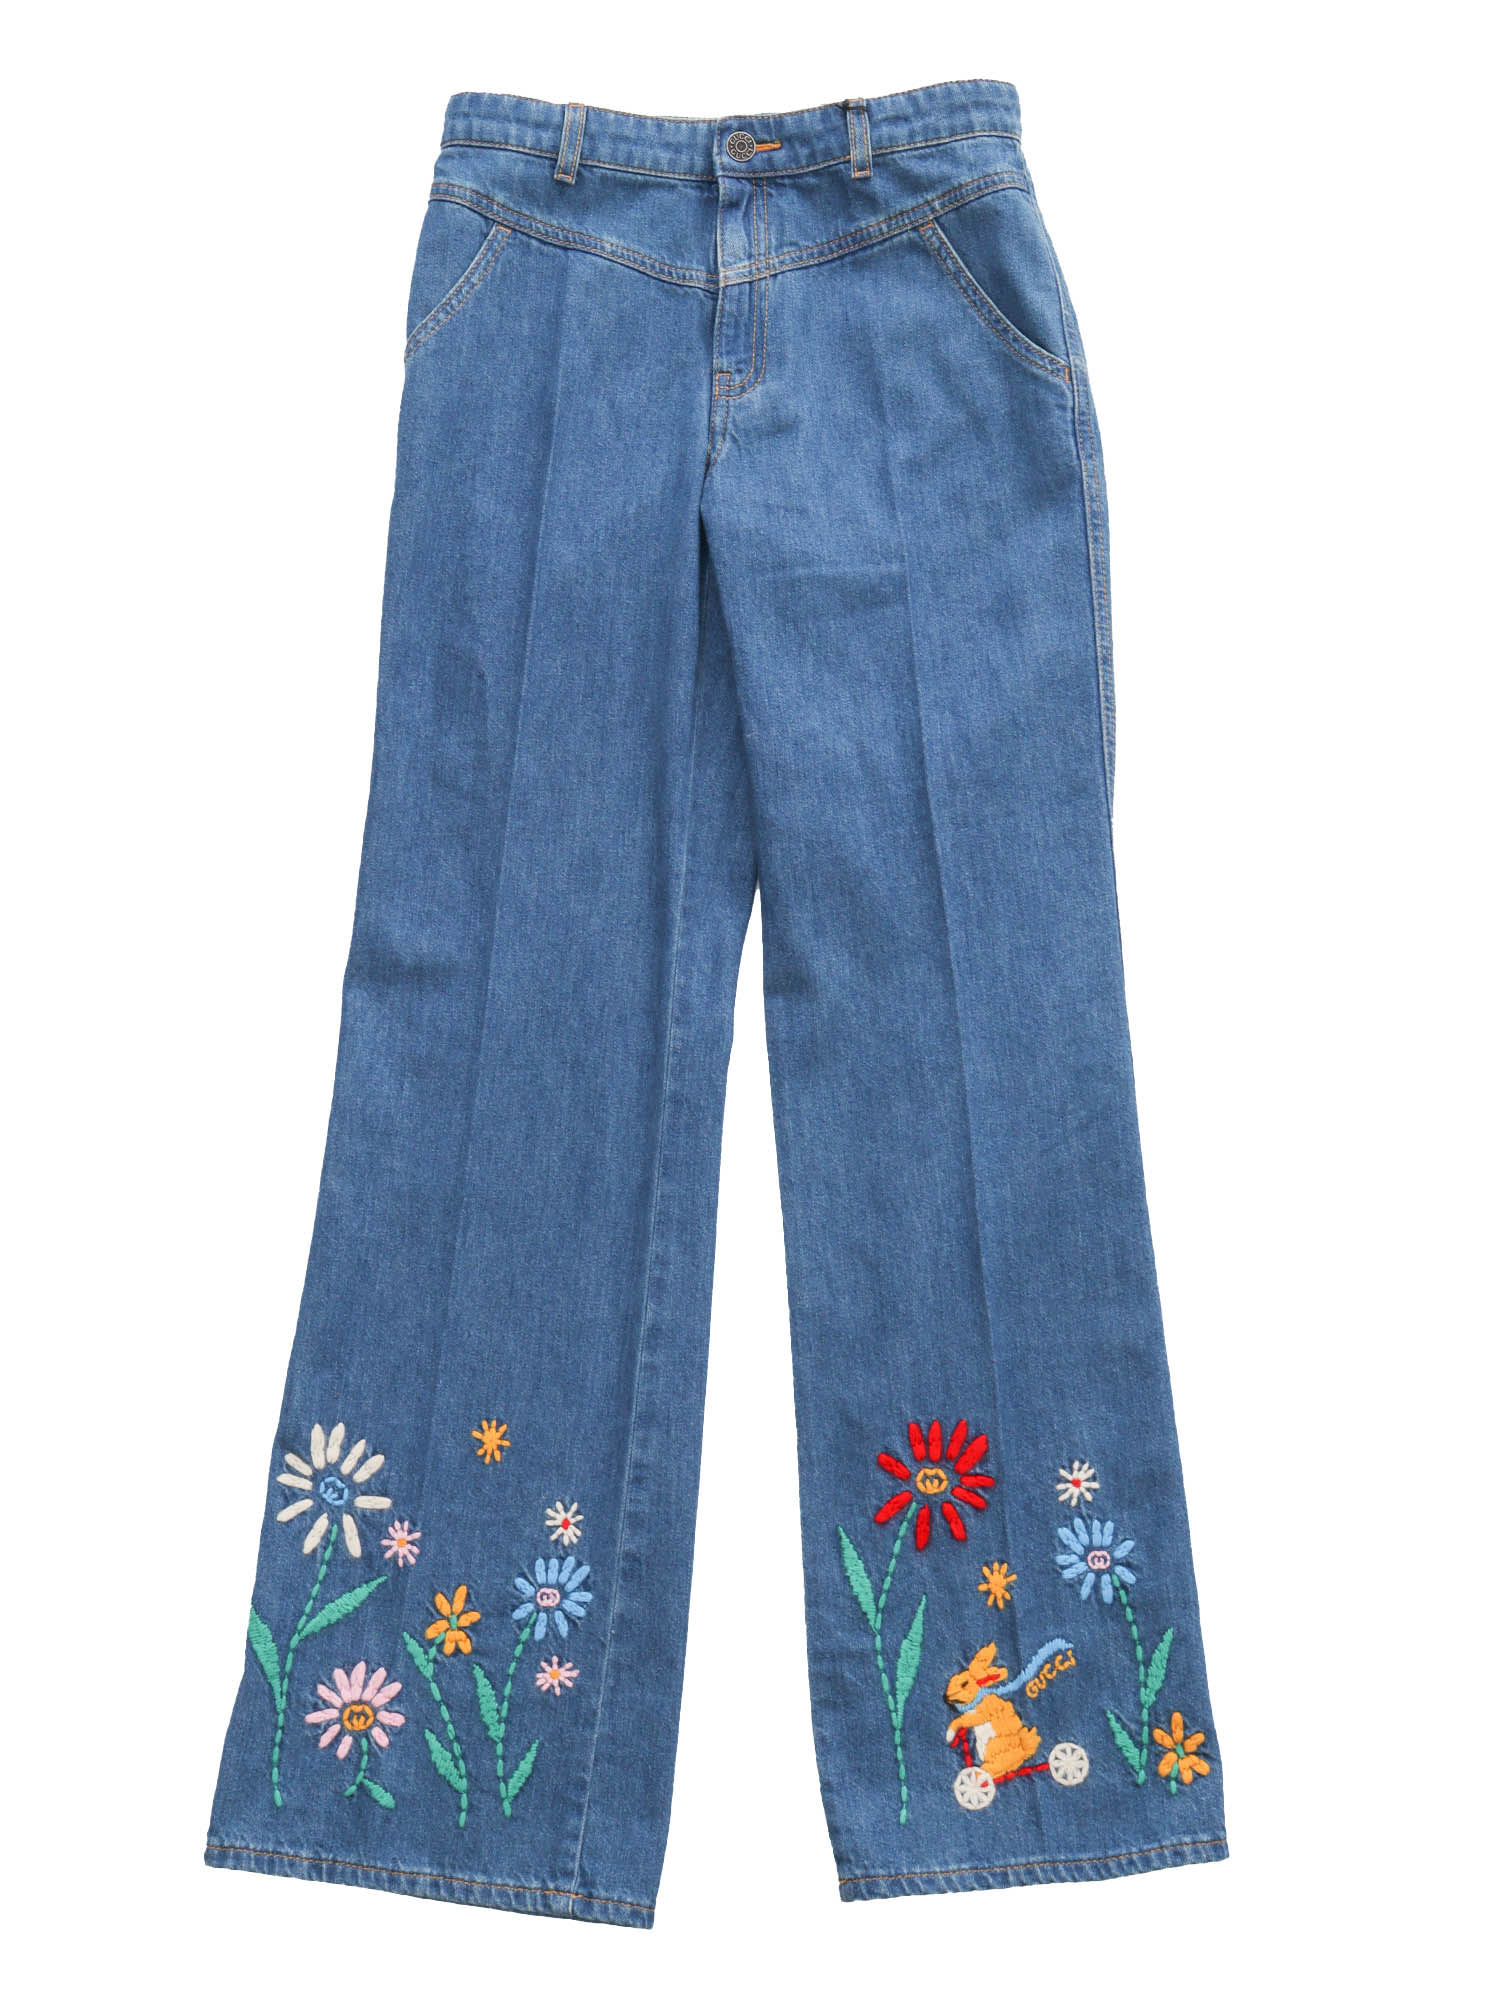 GUCCI FLORAL EMBROIDERY JEANS